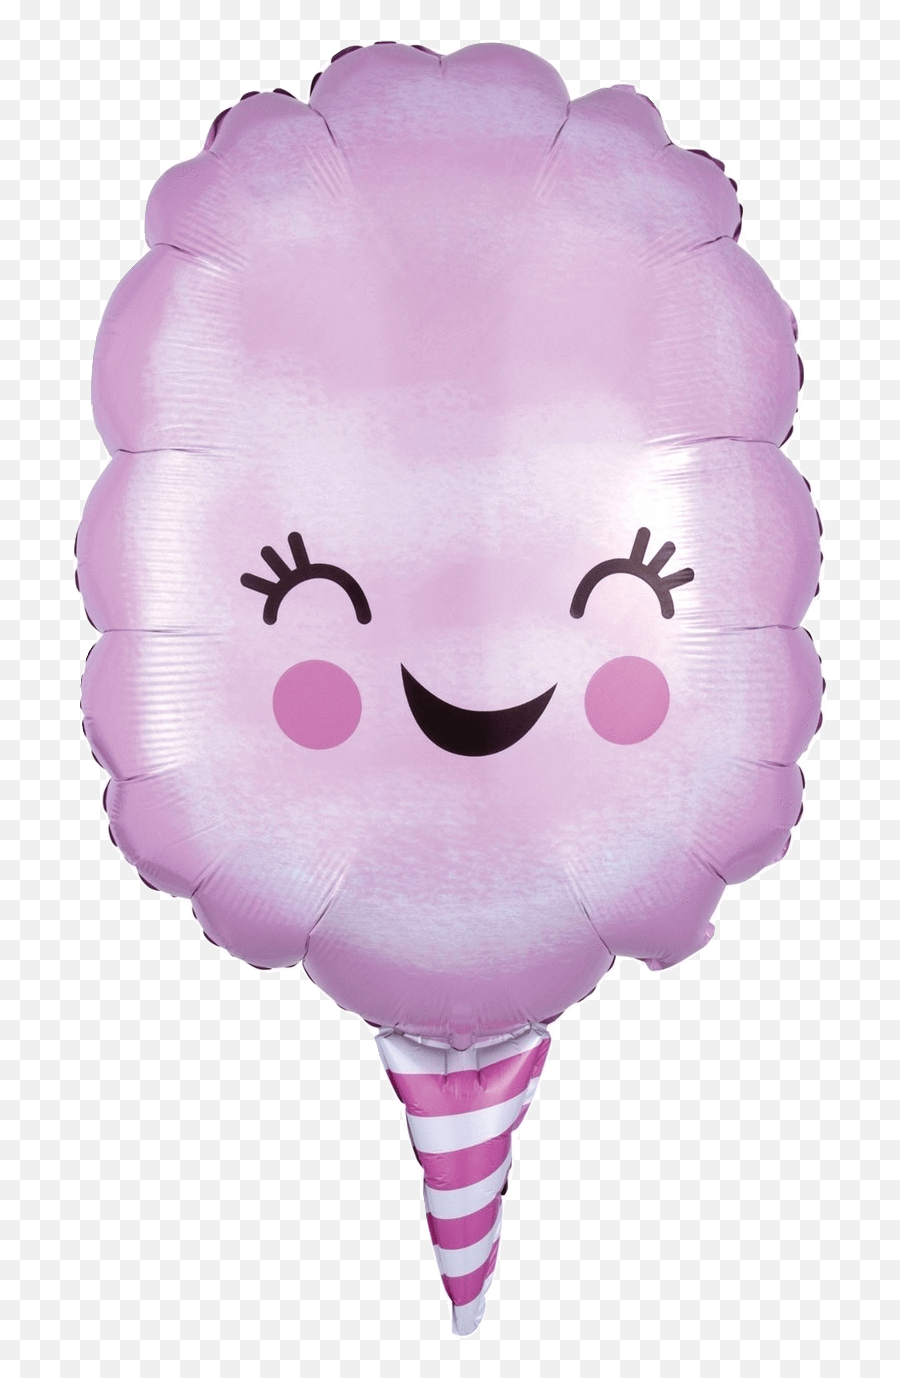 Cotton Candy Giant 30 Tall Balloon Emoji,Starburst Candy Clipart